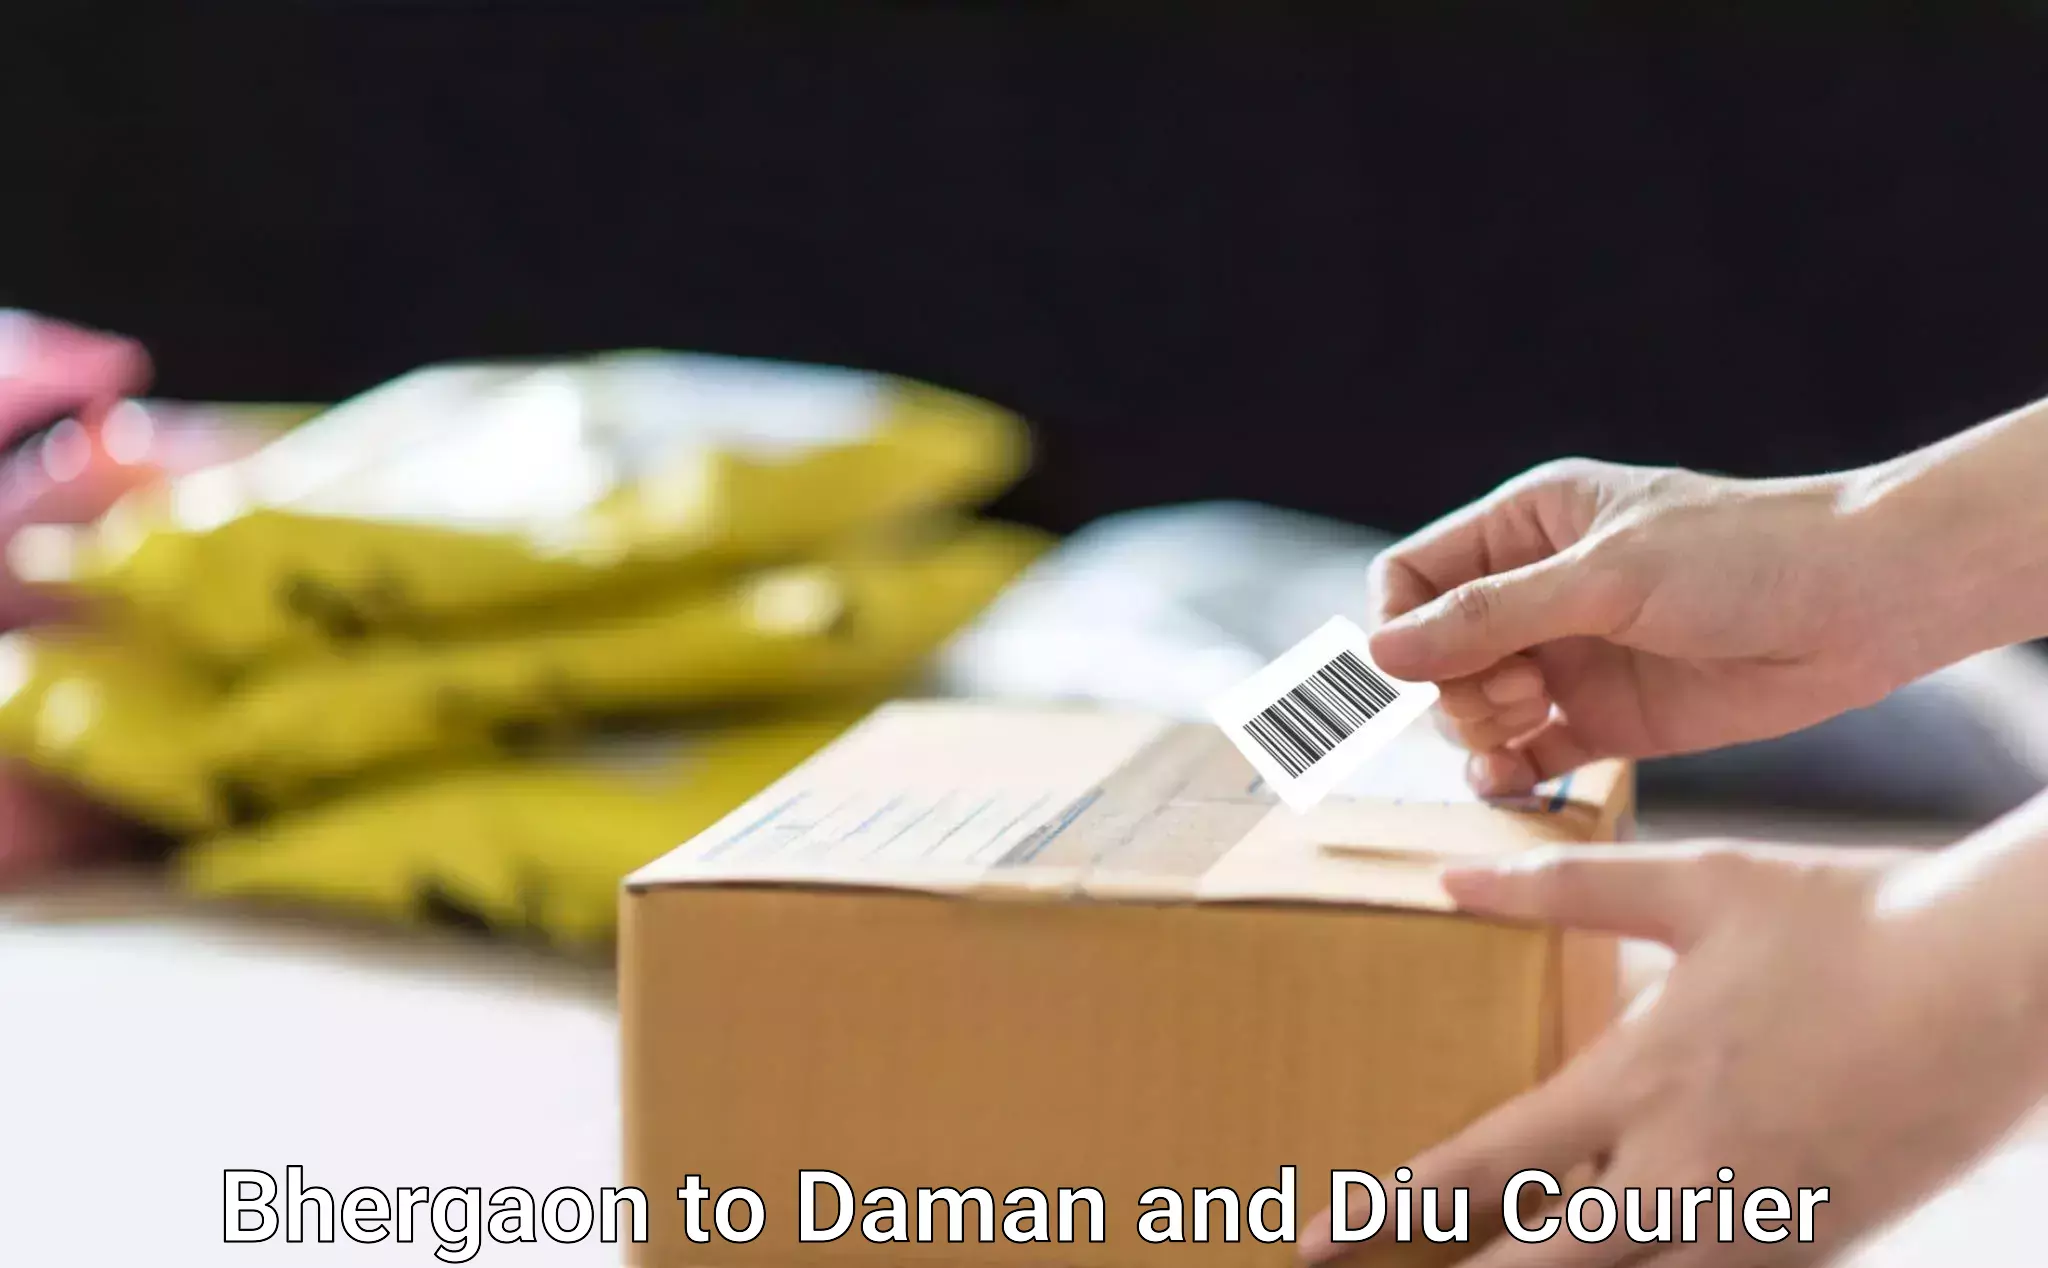 Automated parcel services Bhergaon to Daman and Diu